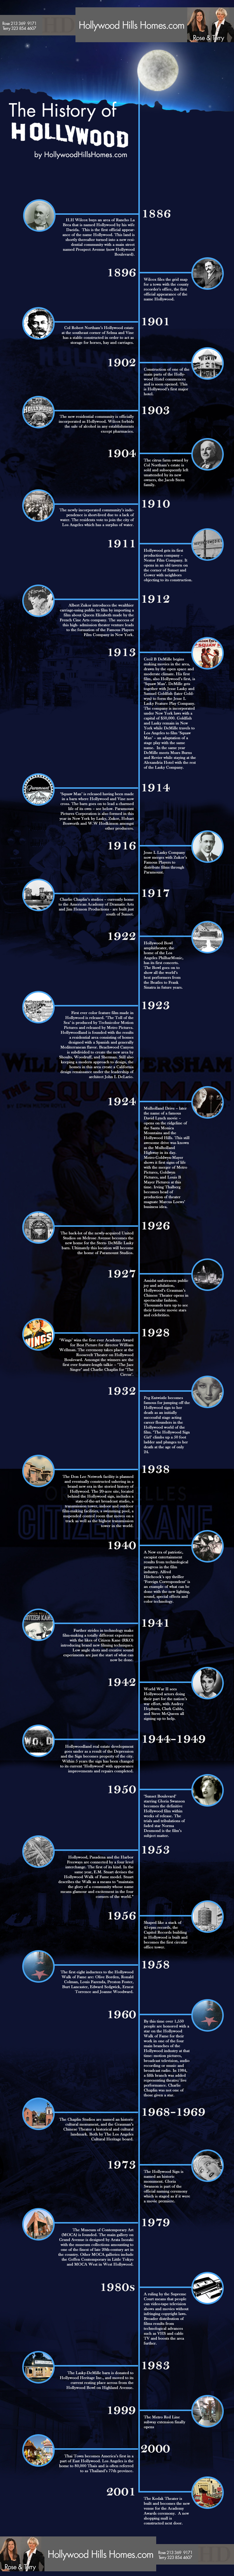 The history of Hollywood